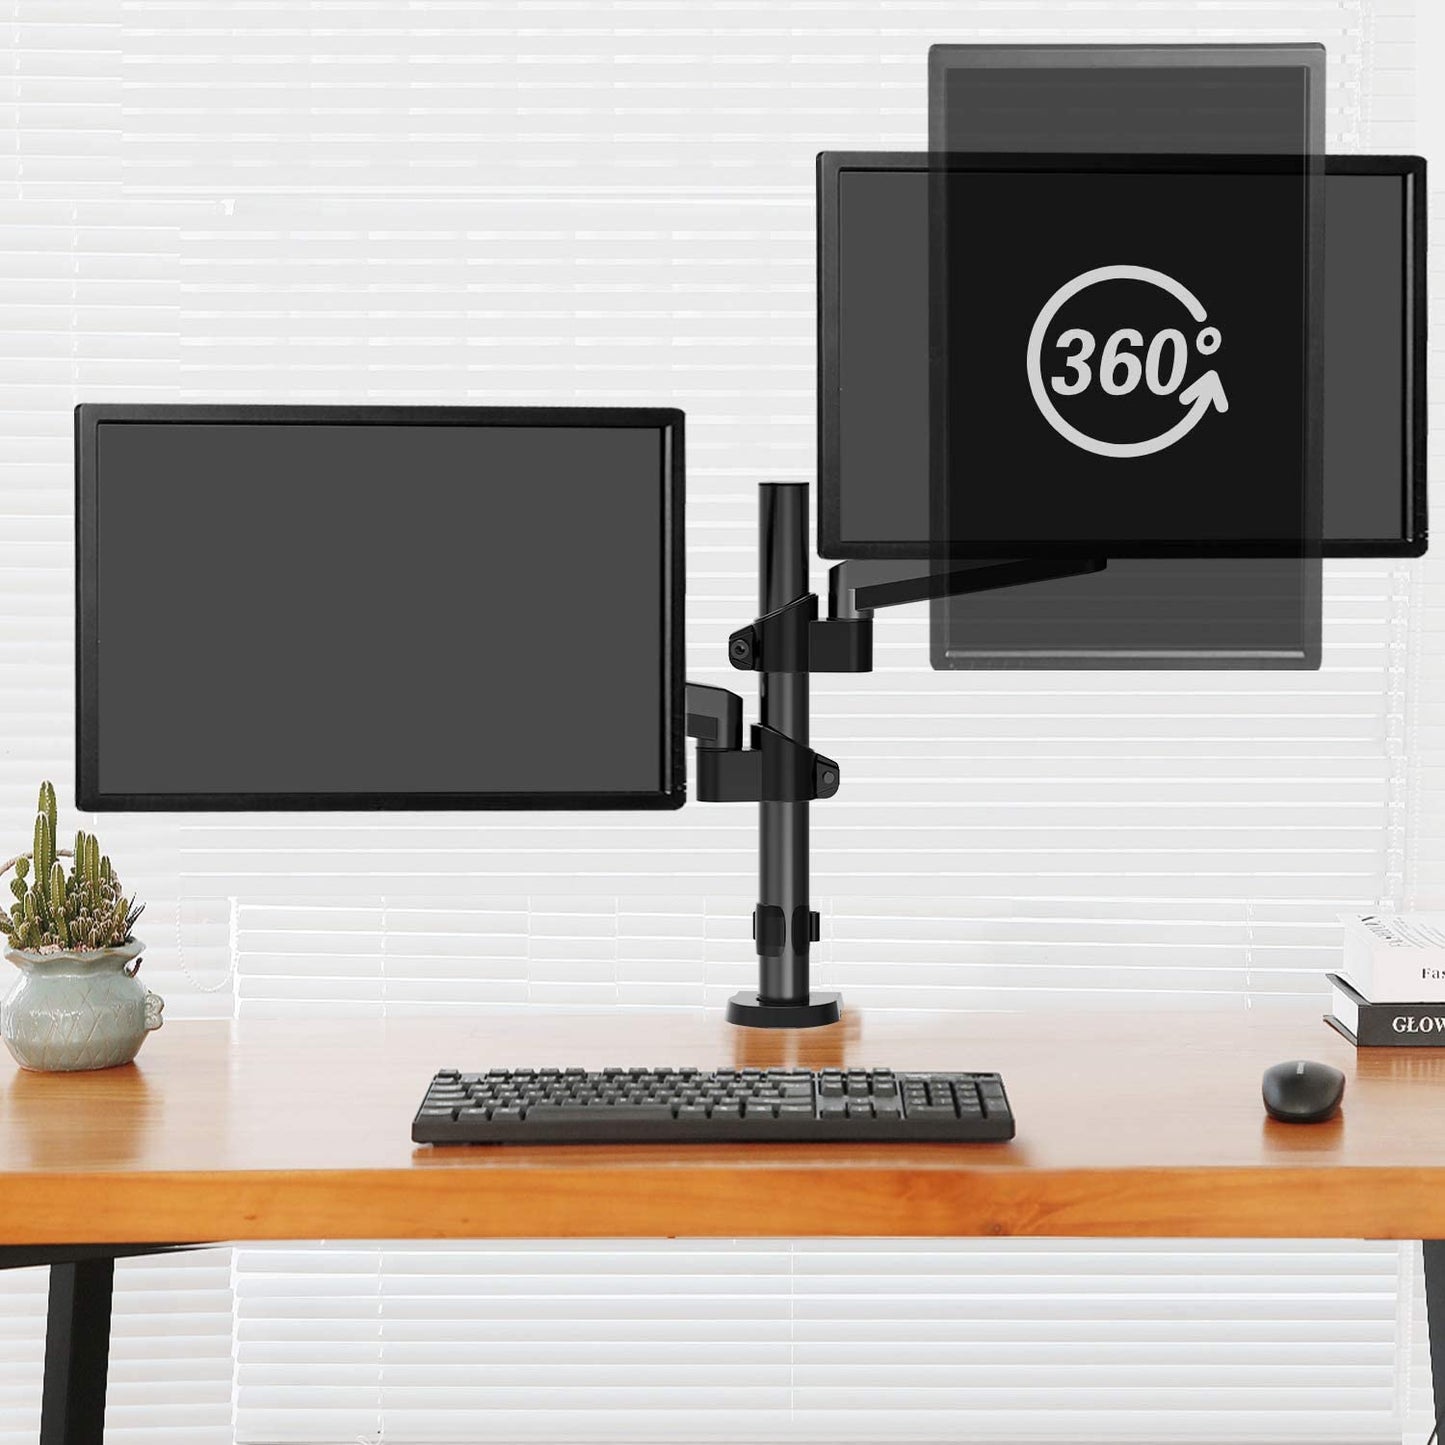 Dual Arms monitor arm mount to fully rotate monitors